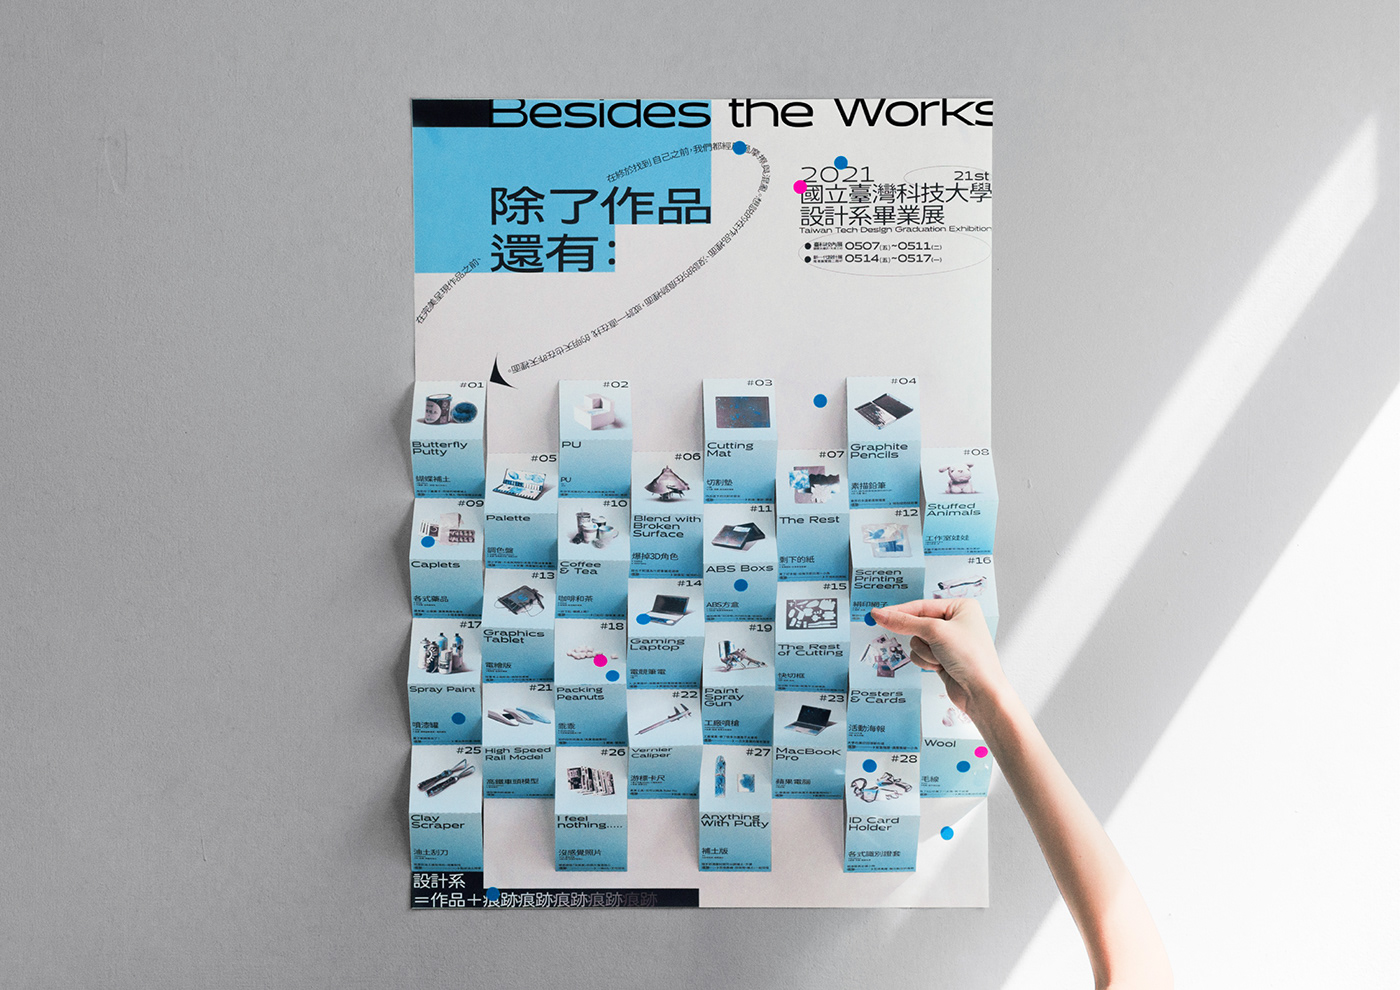 besides the works Exhibition  graduation show taiwantech trace branding  identity interative motion poster